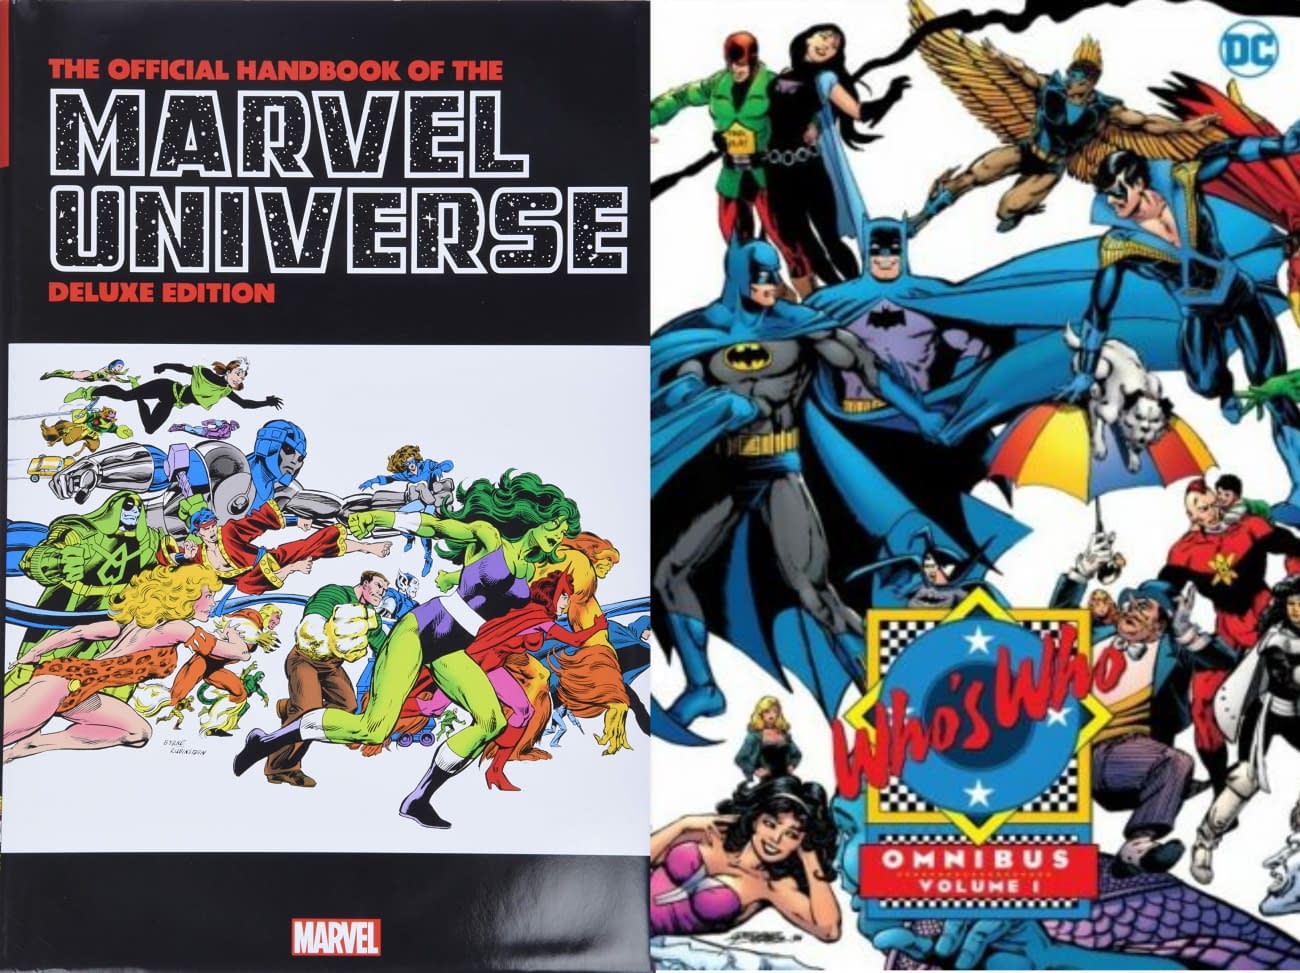 Peter Sanderson Wonders Where His DC Comics Who's Who Omnibus Is...